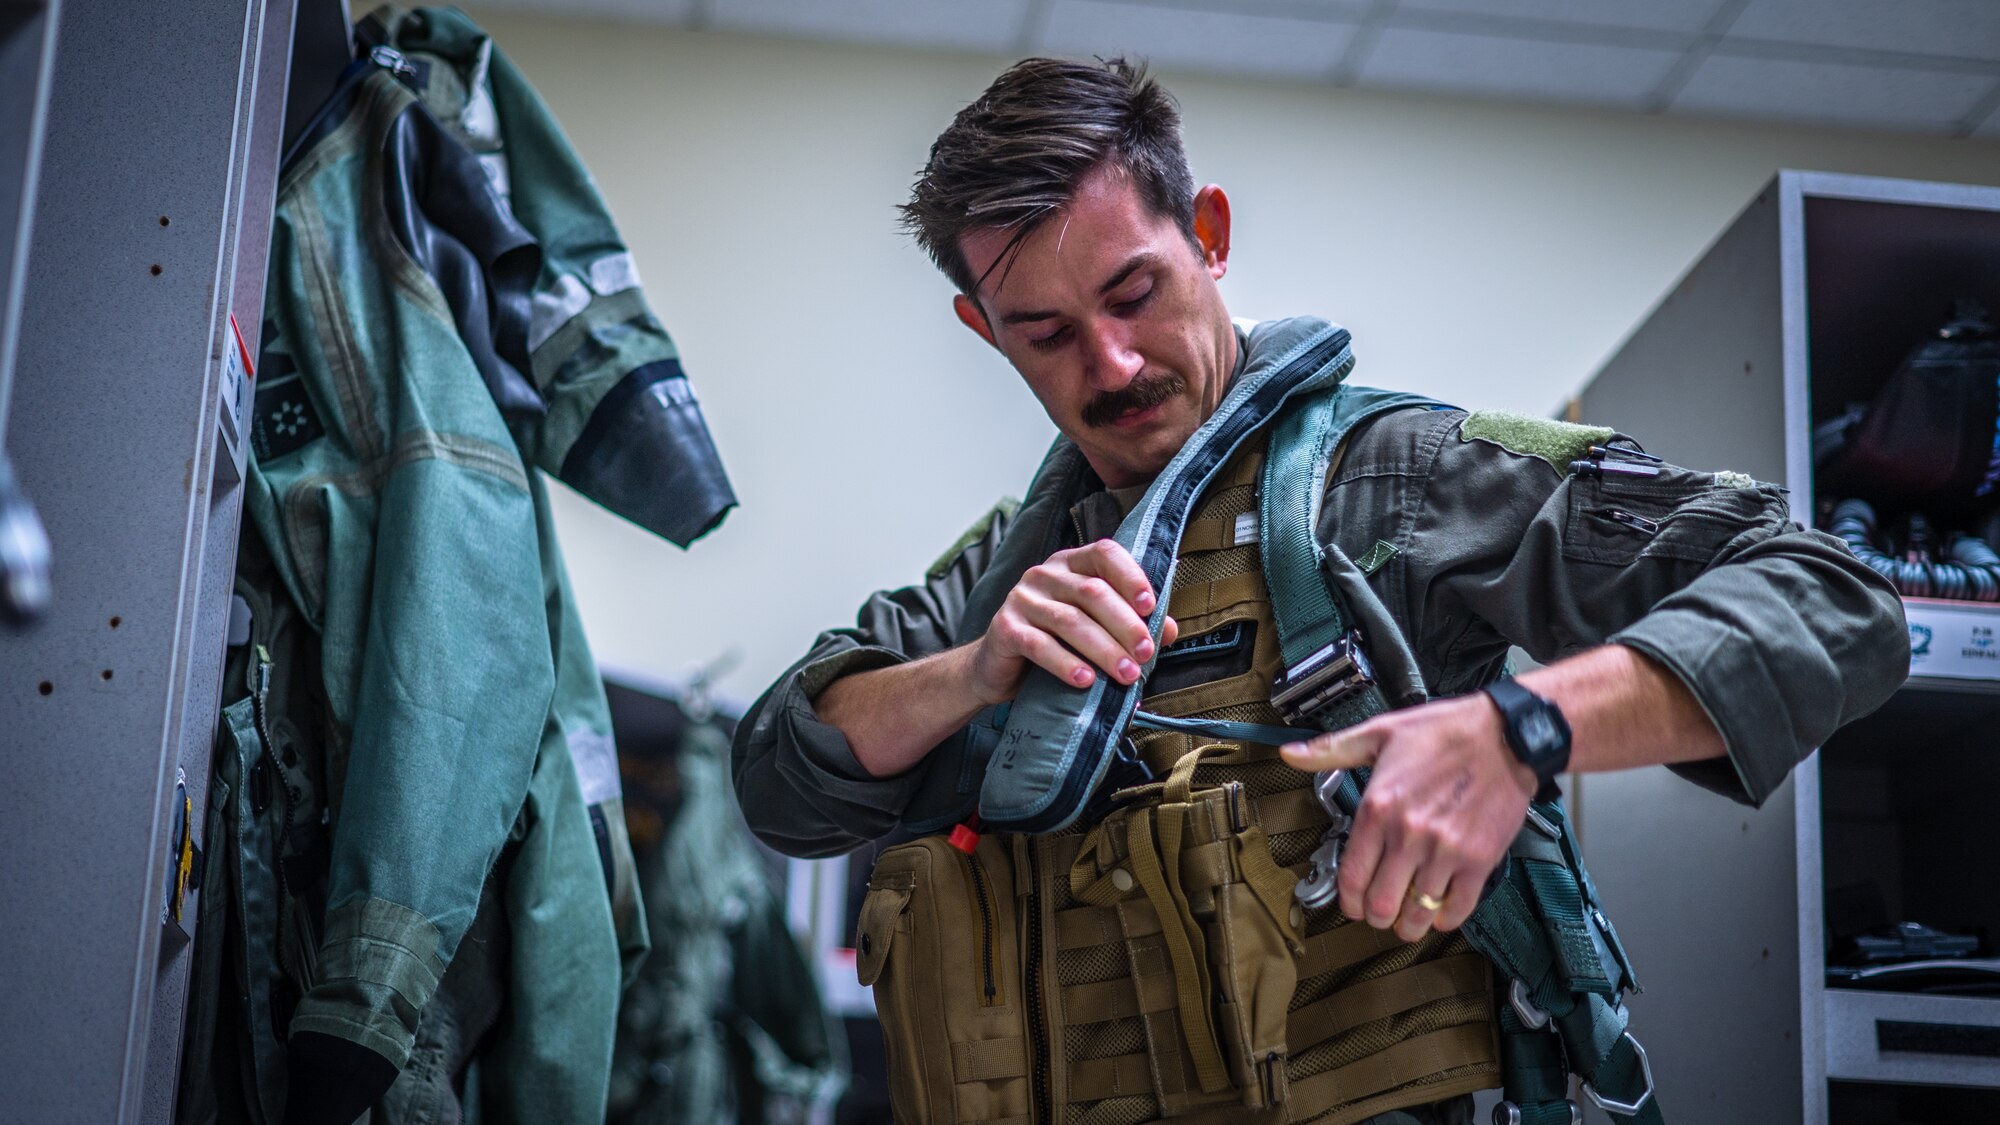 Capt. Tyler Hansen, dons flight gear before a large force training exercise.